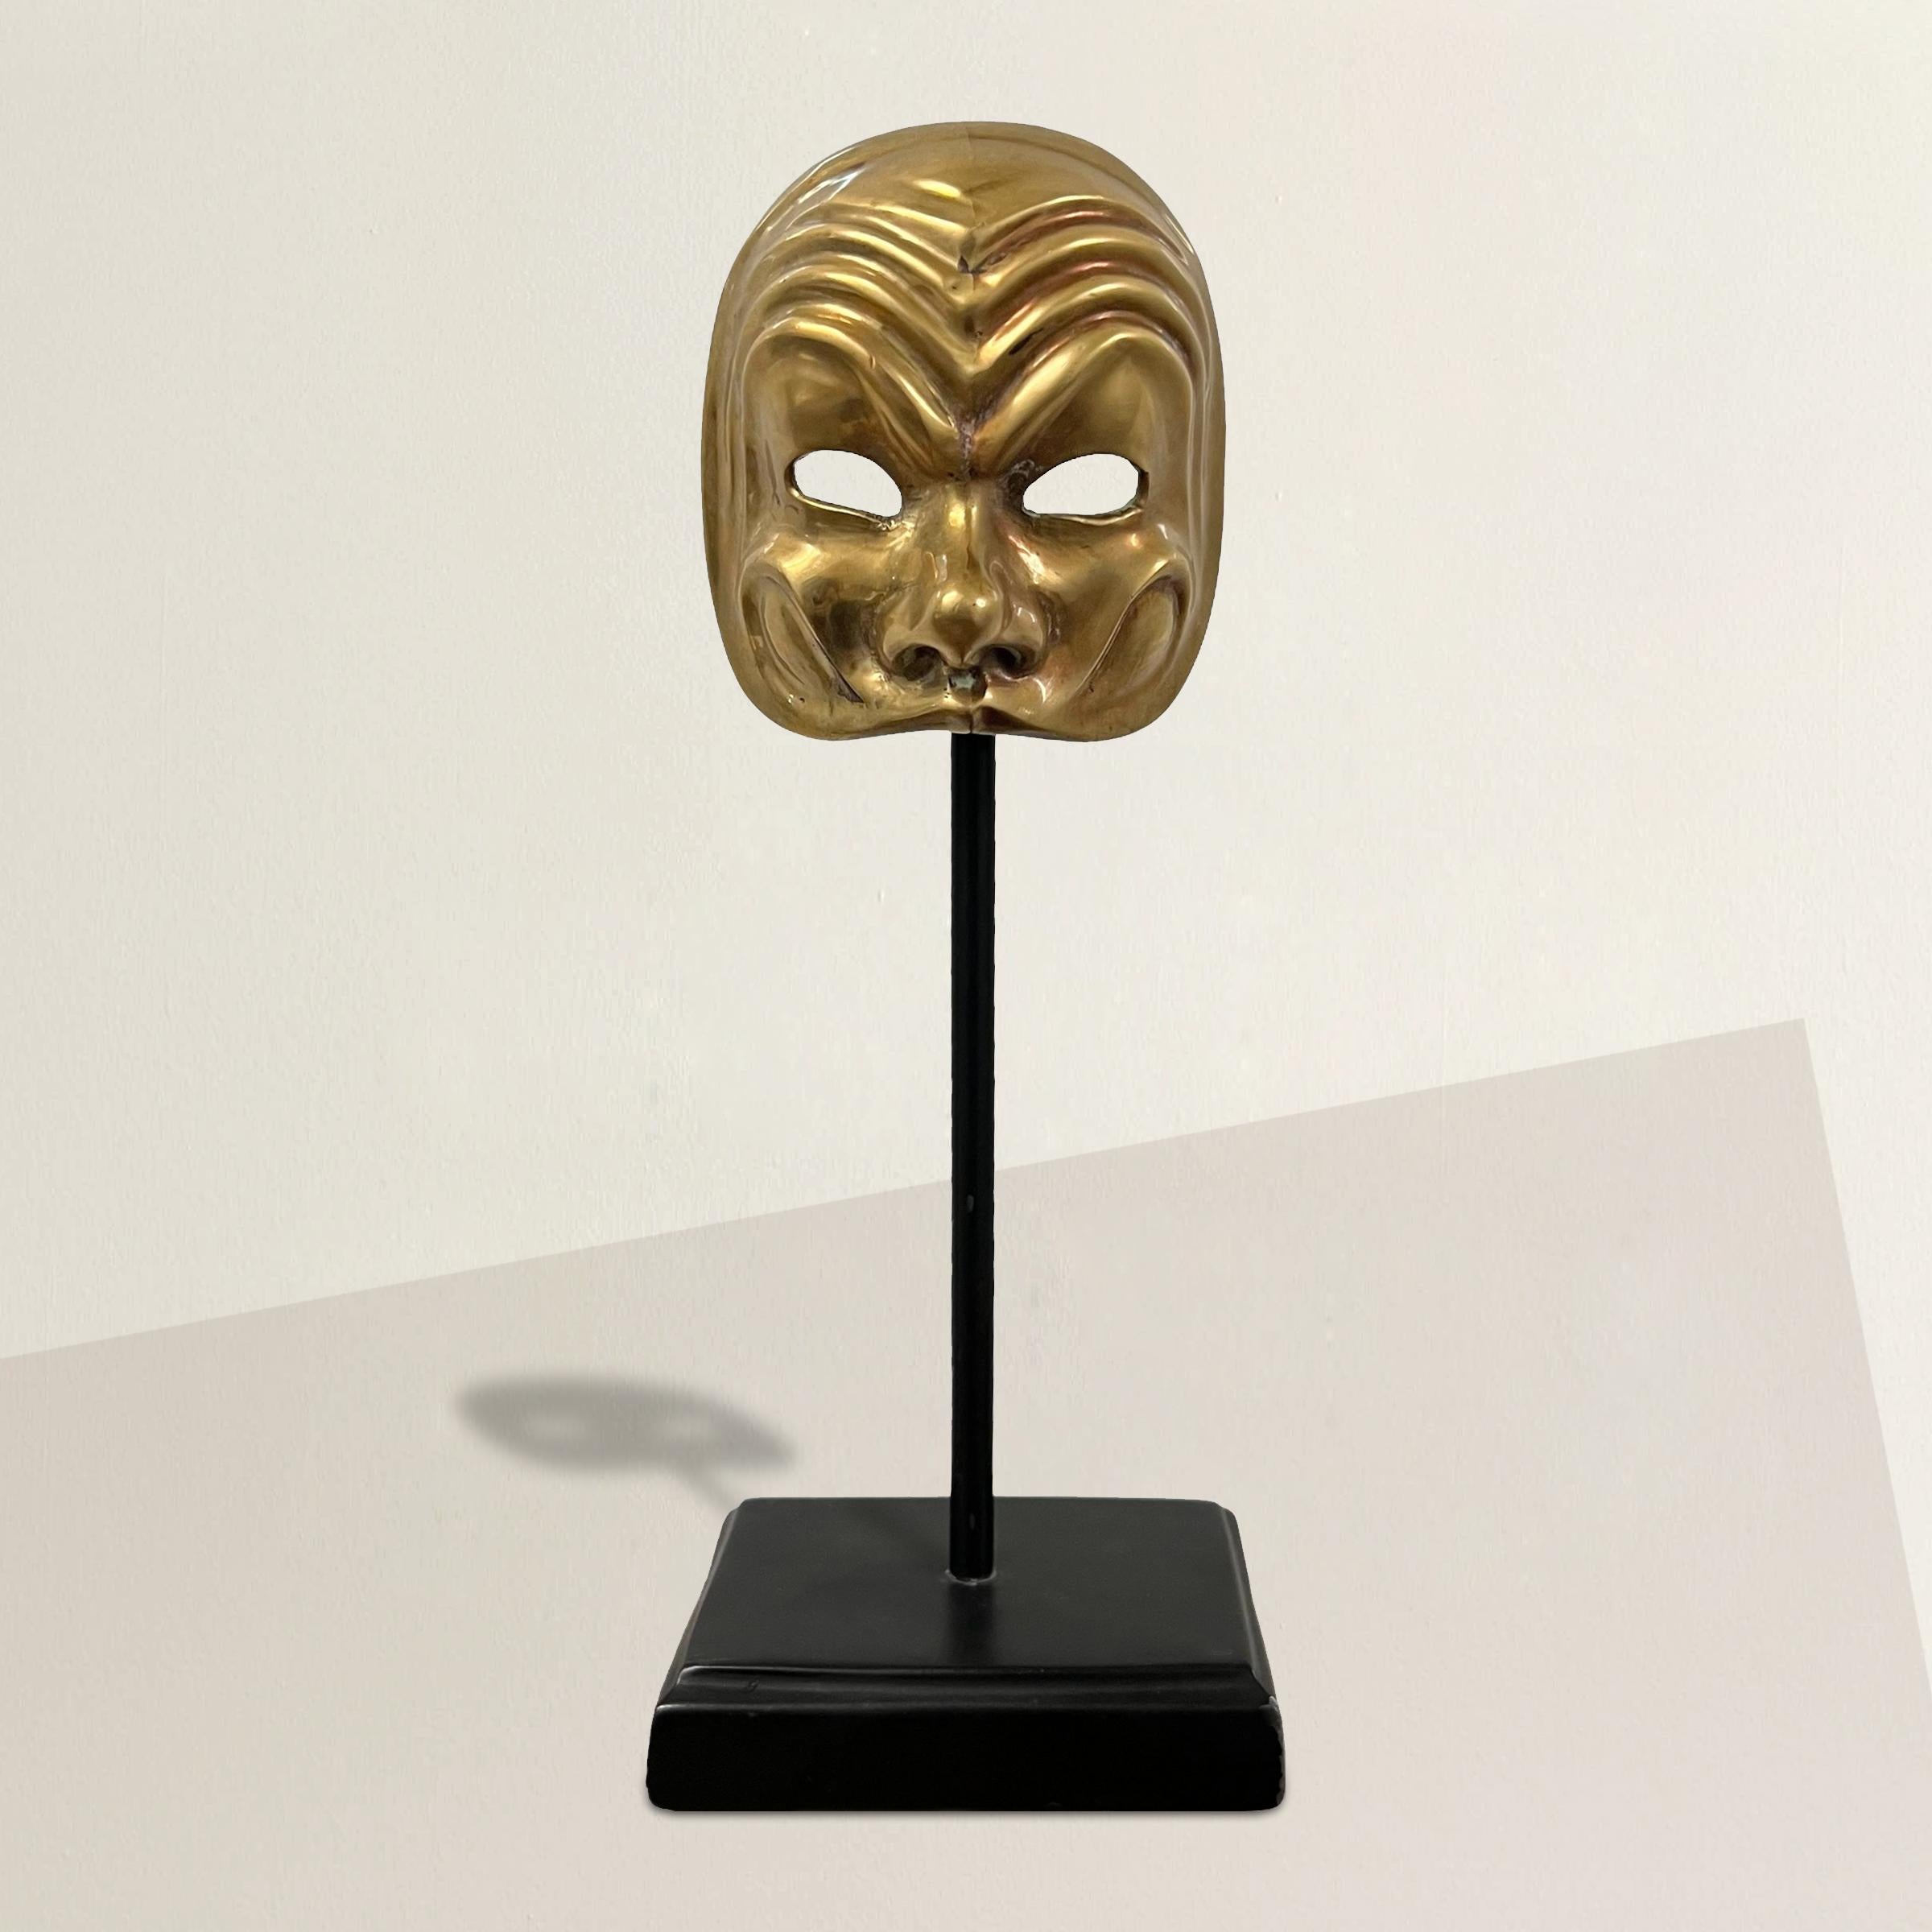 This miniature cast brass Italian opera mask, mounted on a custom steel stand, offers a charming glimpse into the extravagant world of 18th and 19th-century Venetian masquerade balls. Exquisitely detailed, this half-mask, though diminutive in size,